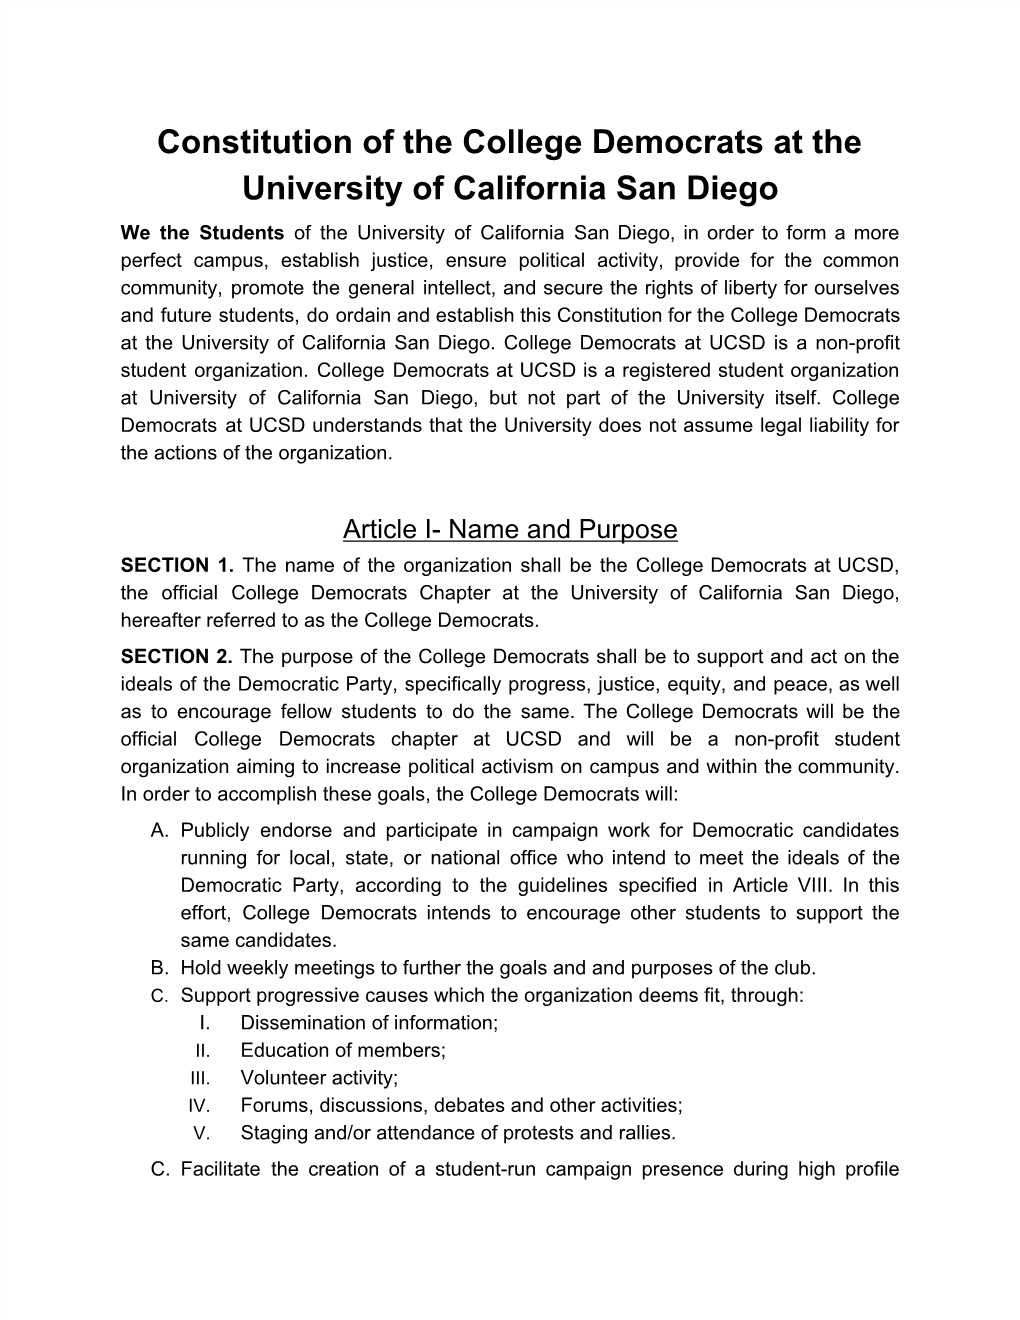 Constitution of the College Democrats at the University of California San